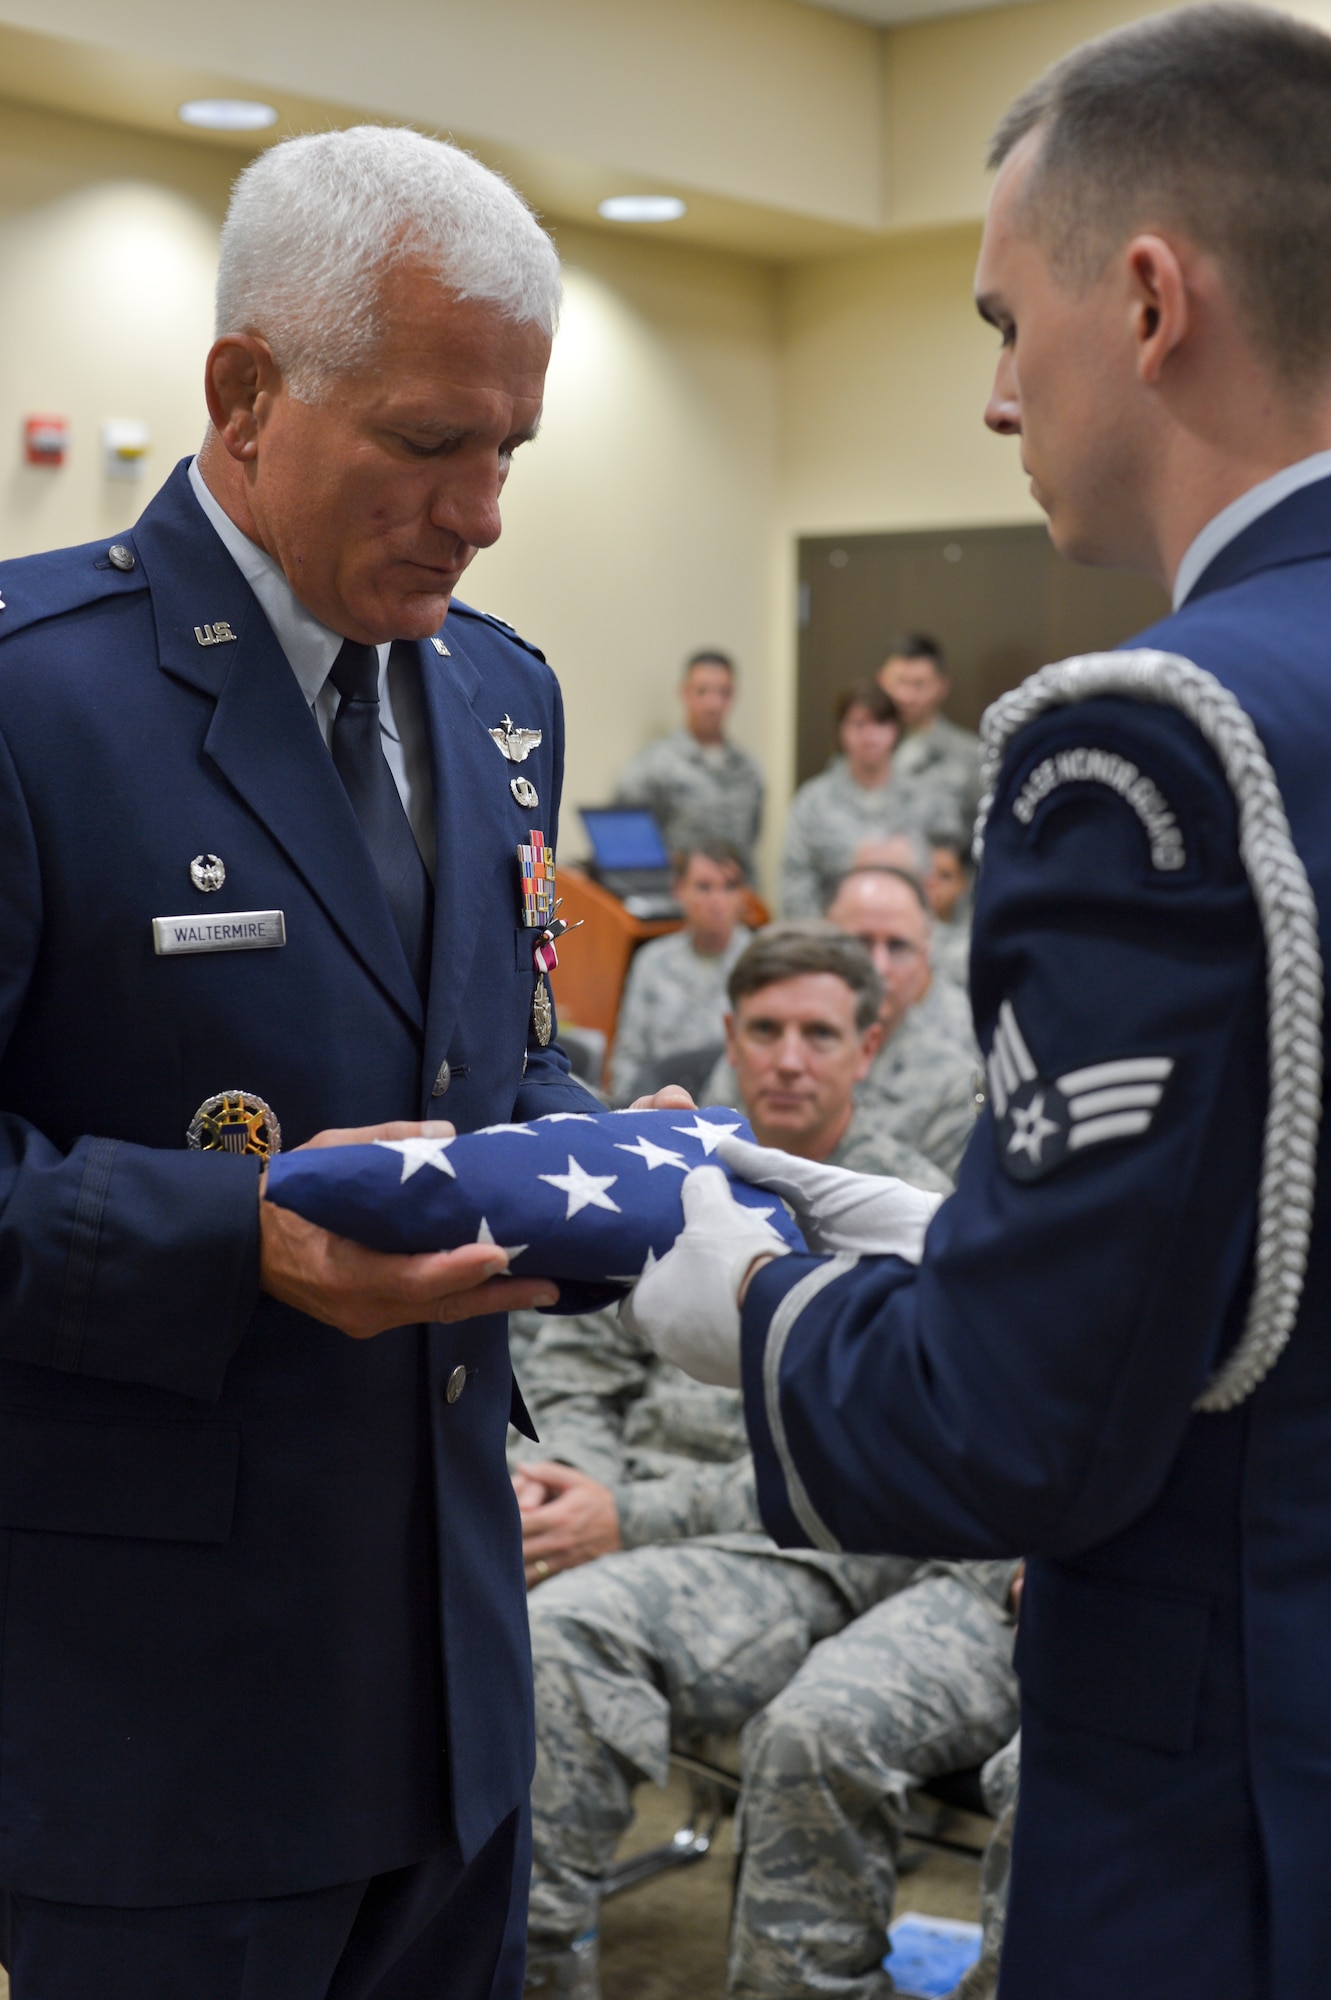 Air Force Lt. Col. James B. Waltermire receives the U.S. flag during his retirement ceremony, August 2, 2015, at the 146th Air Support Operations Squadron, Will Rogers Air National Guard Base. The 146 ASOS held a joint ceremony honoring Lt. Col. Waltermire and welcoming Air Force Maj. Christopher D. Gries as the new squardron commander. (U.S. Air National Guard photo by Tech. Sgt. Caroline Essex/Released) 